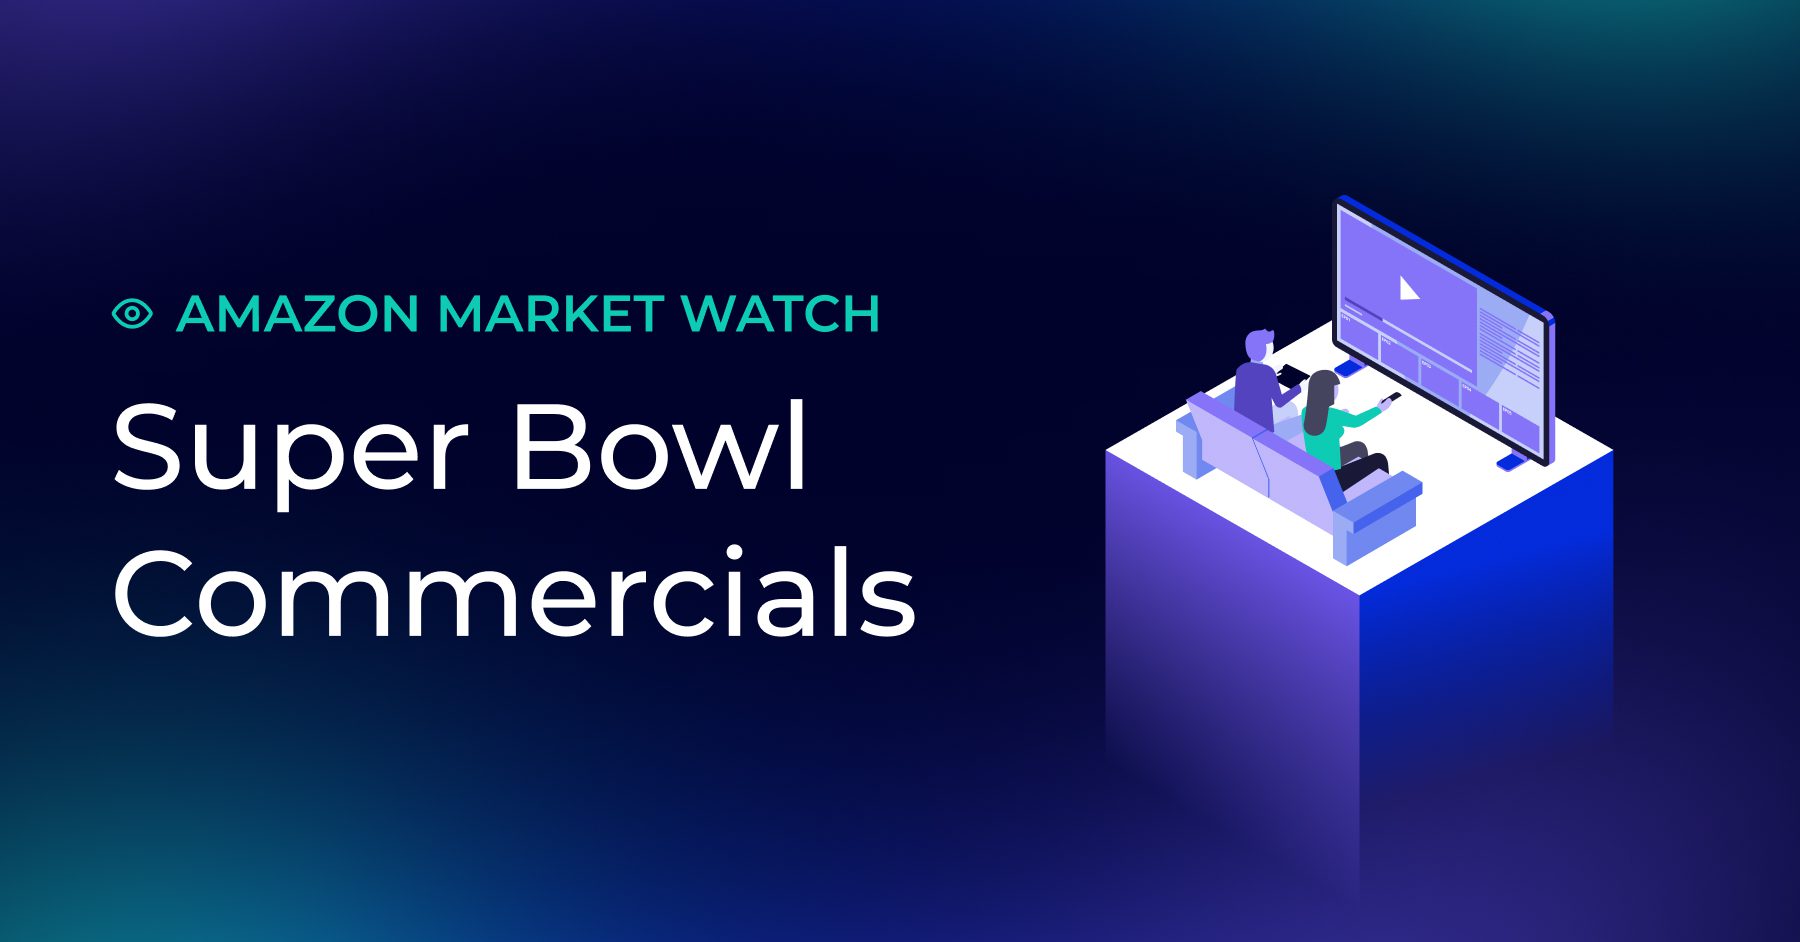 Super Bowl commercials spike sales on Amazon